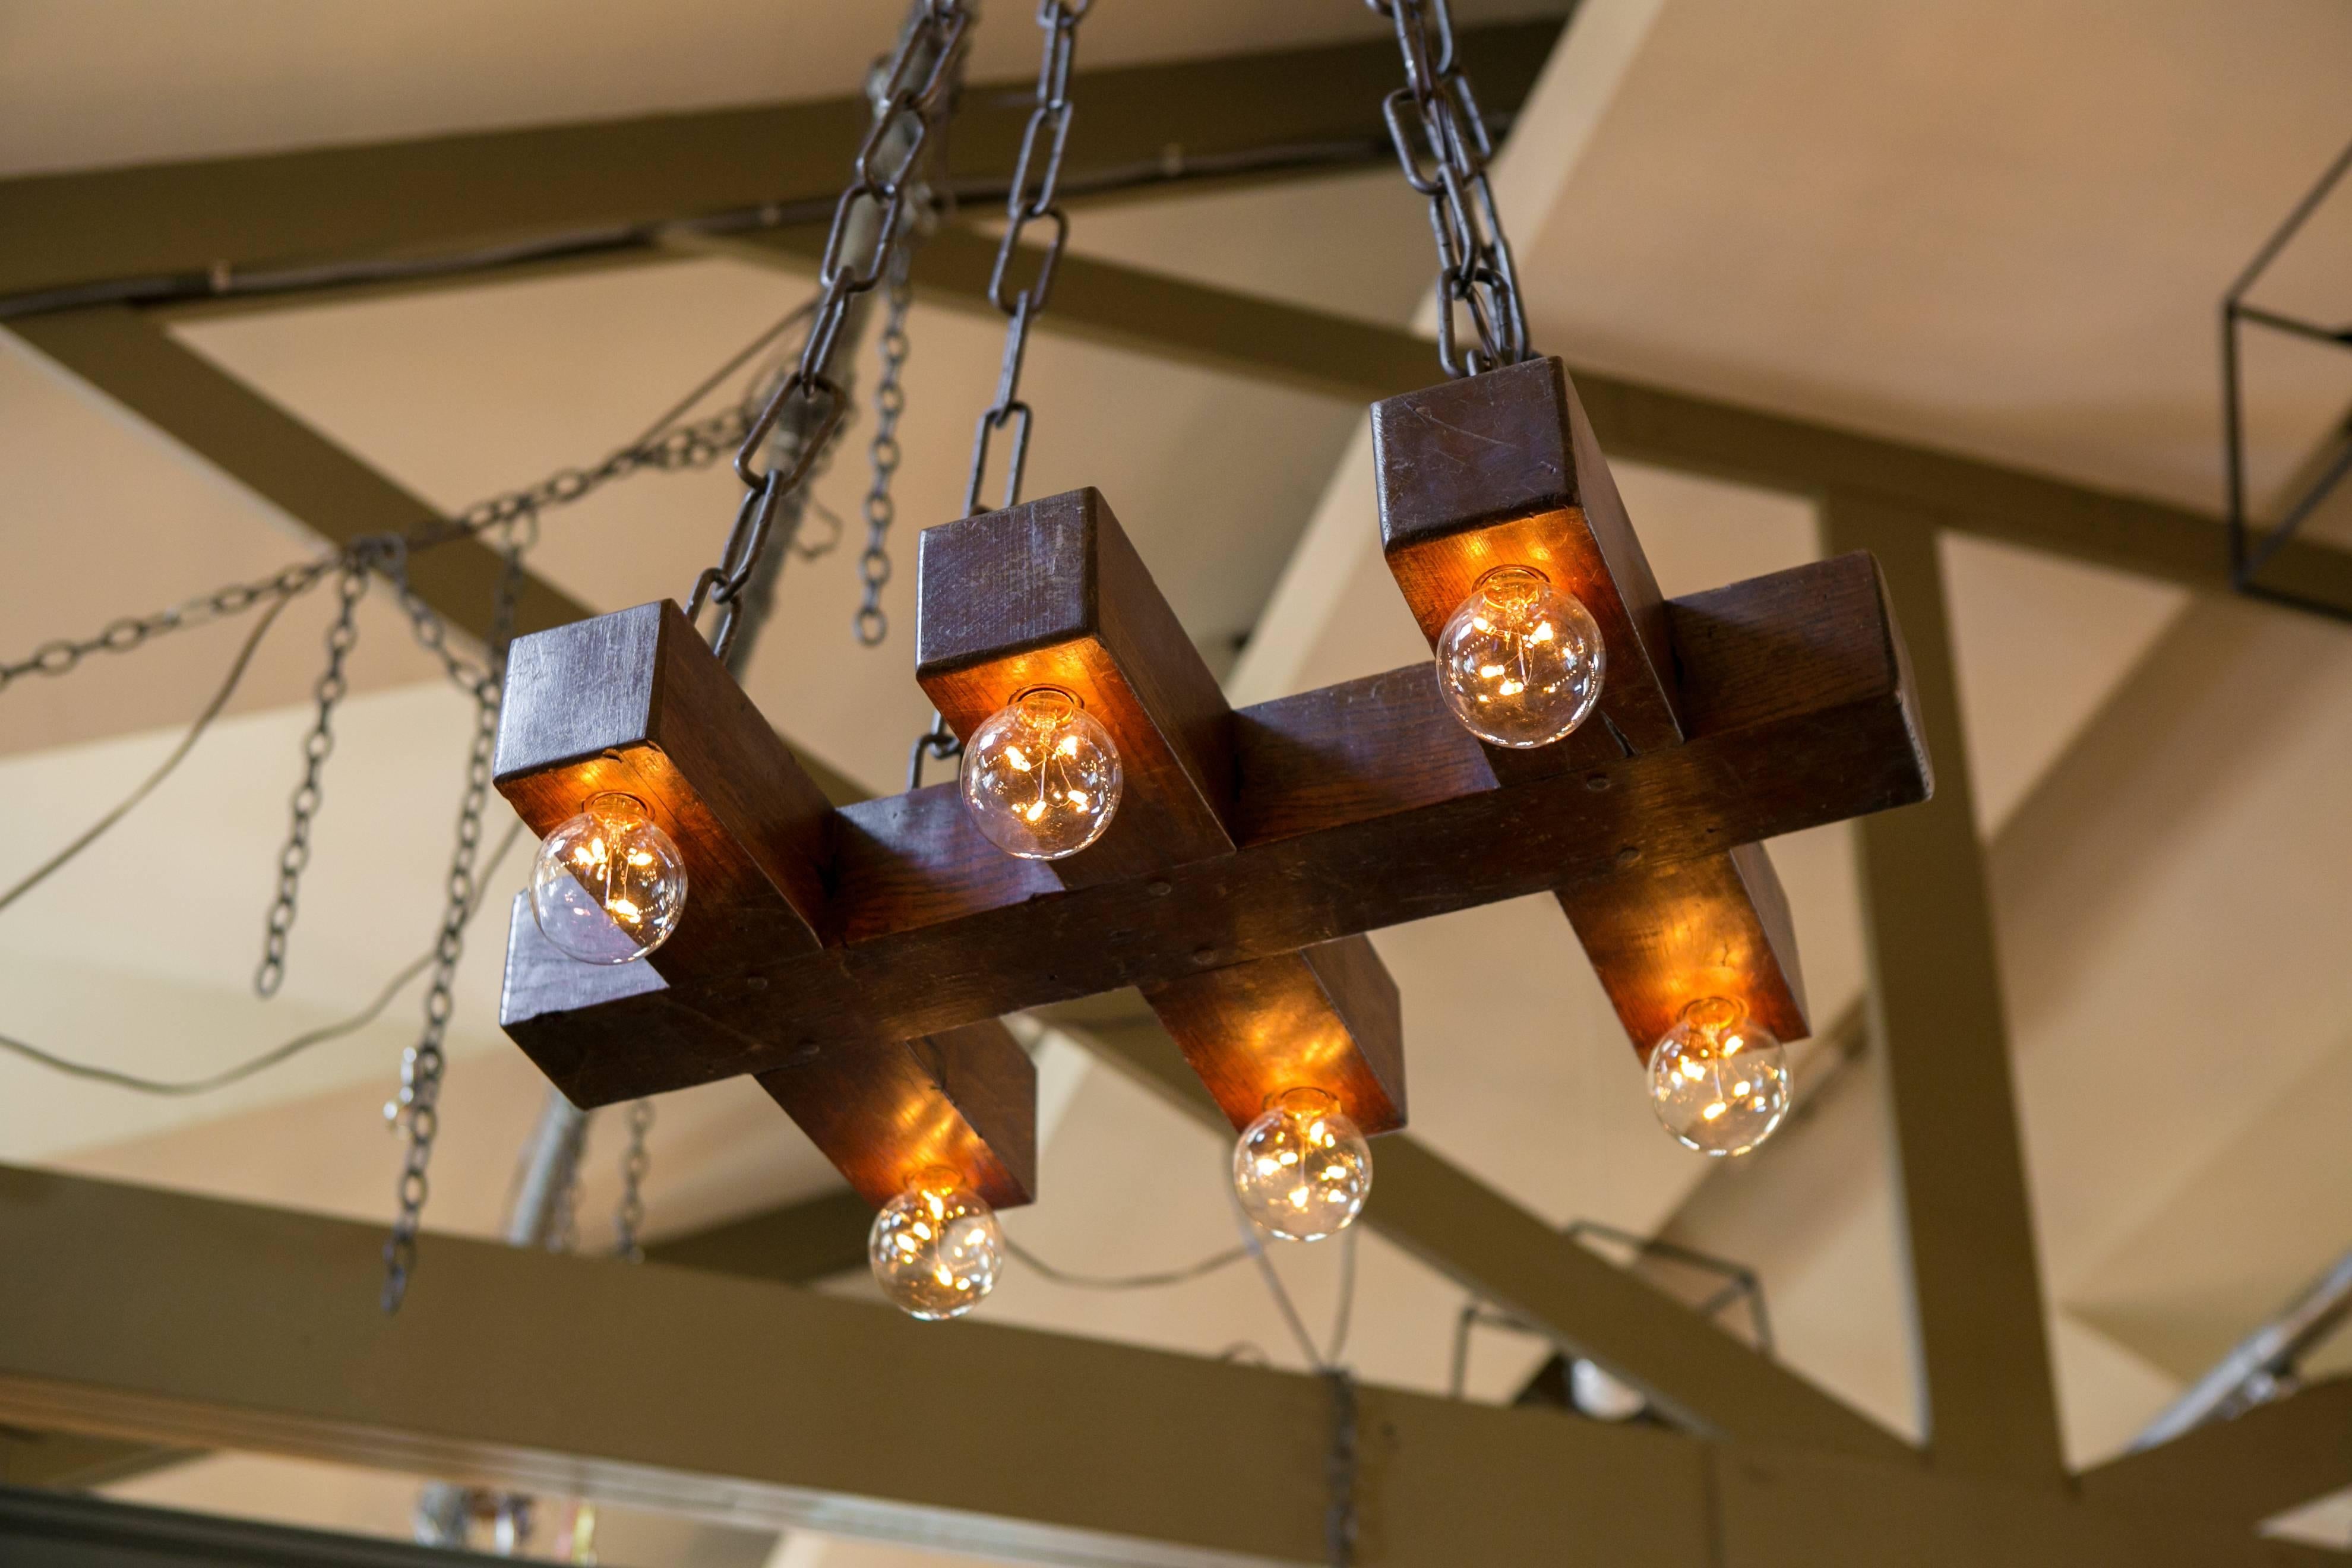 Hand-Crafted Handmade Wooden Geometric Light with Six Sockets from Belgium, circa 1940